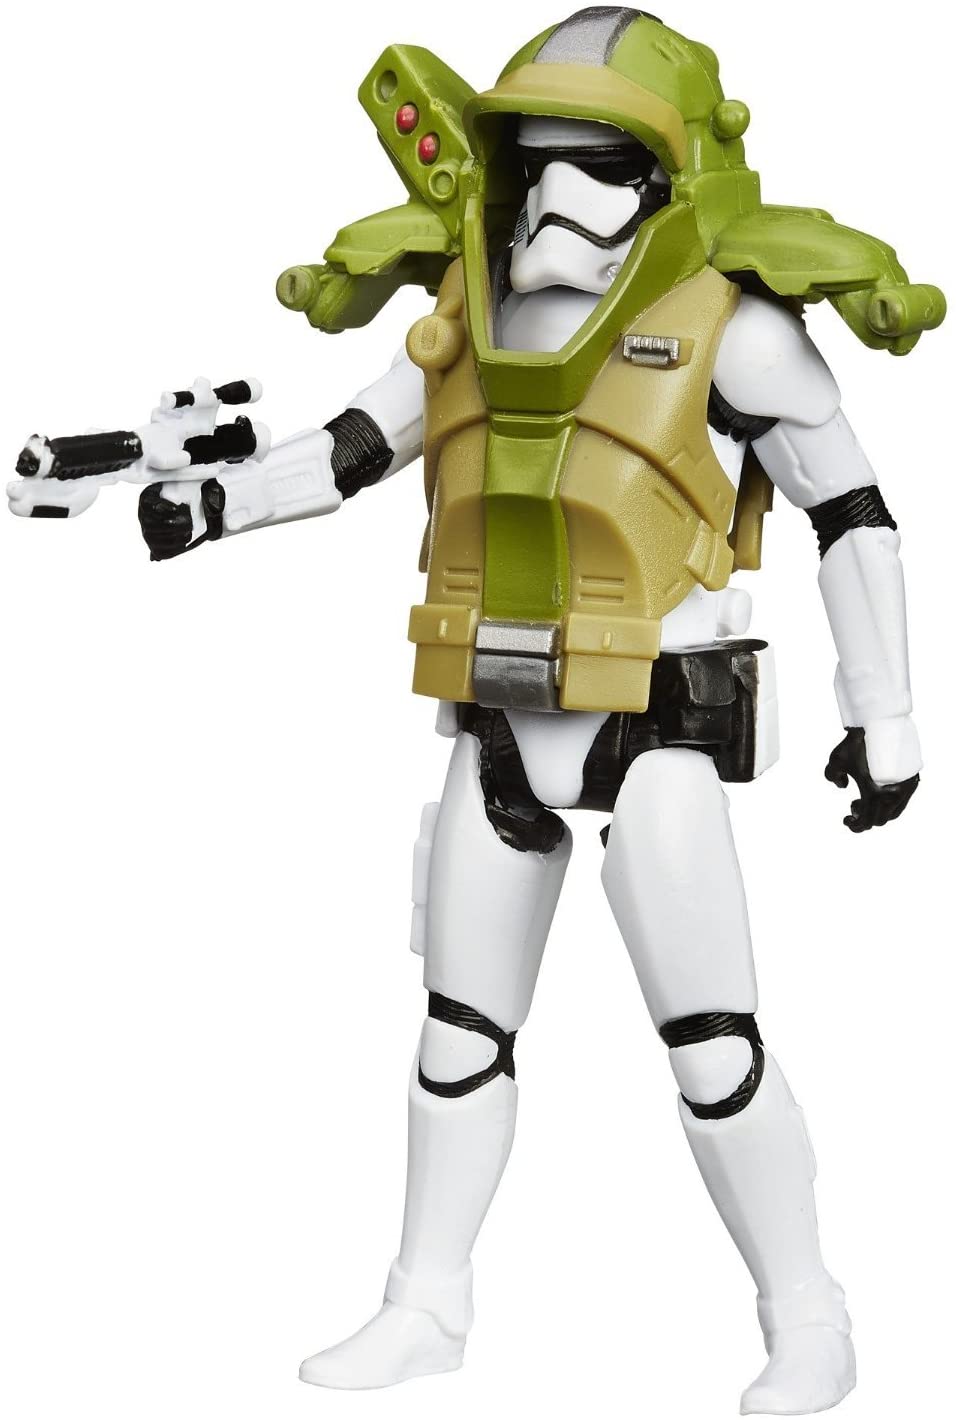 Star Wars Armour Up First Order Storm Trooper